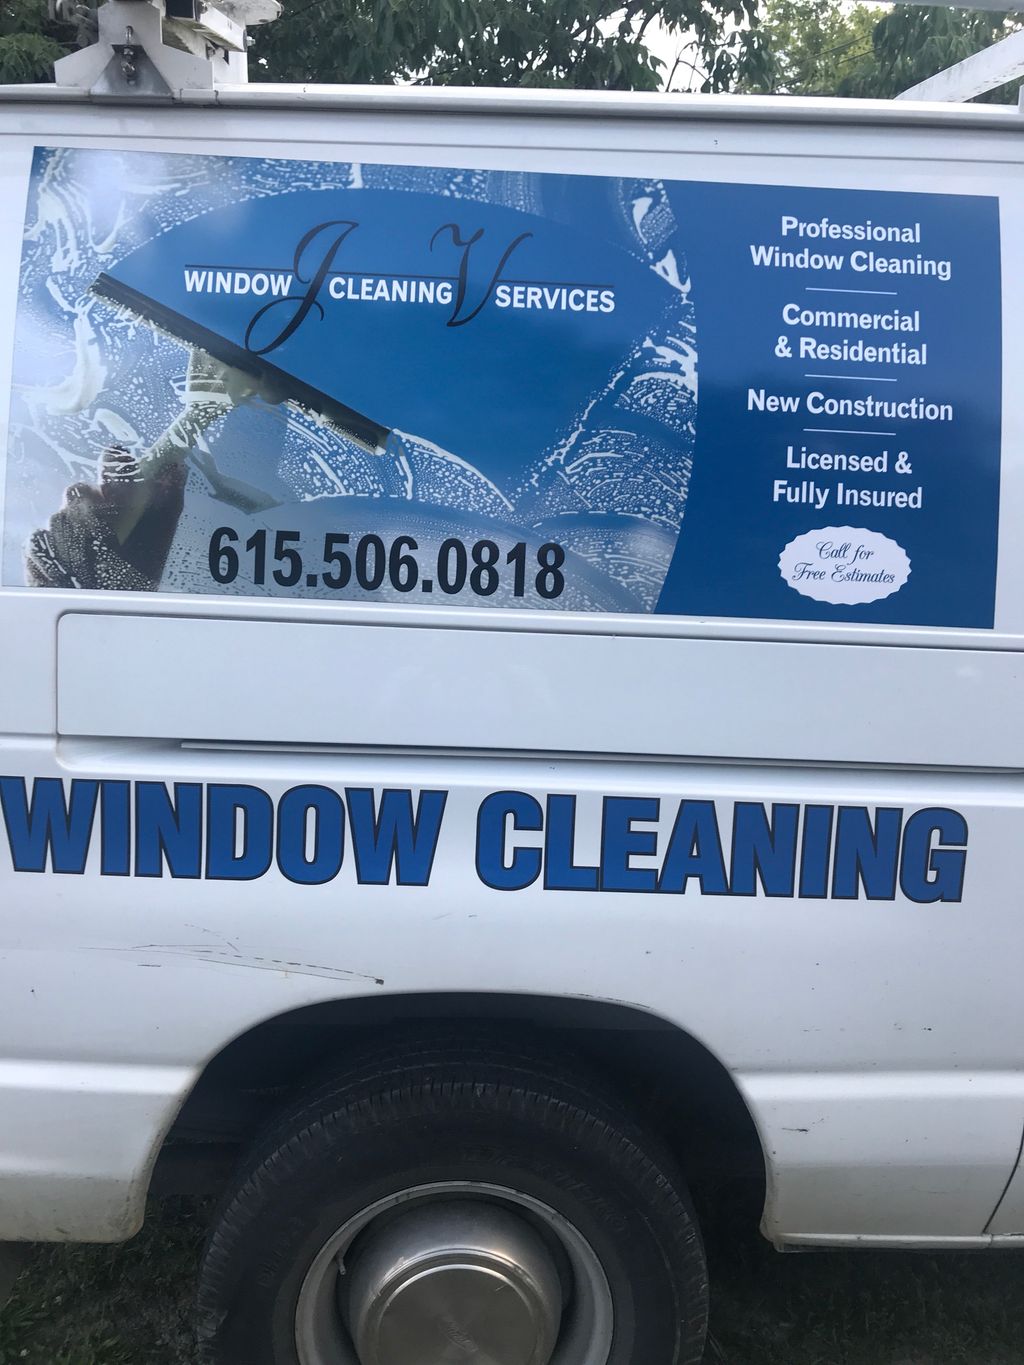 JV WINDOW CLEANING SERVICE